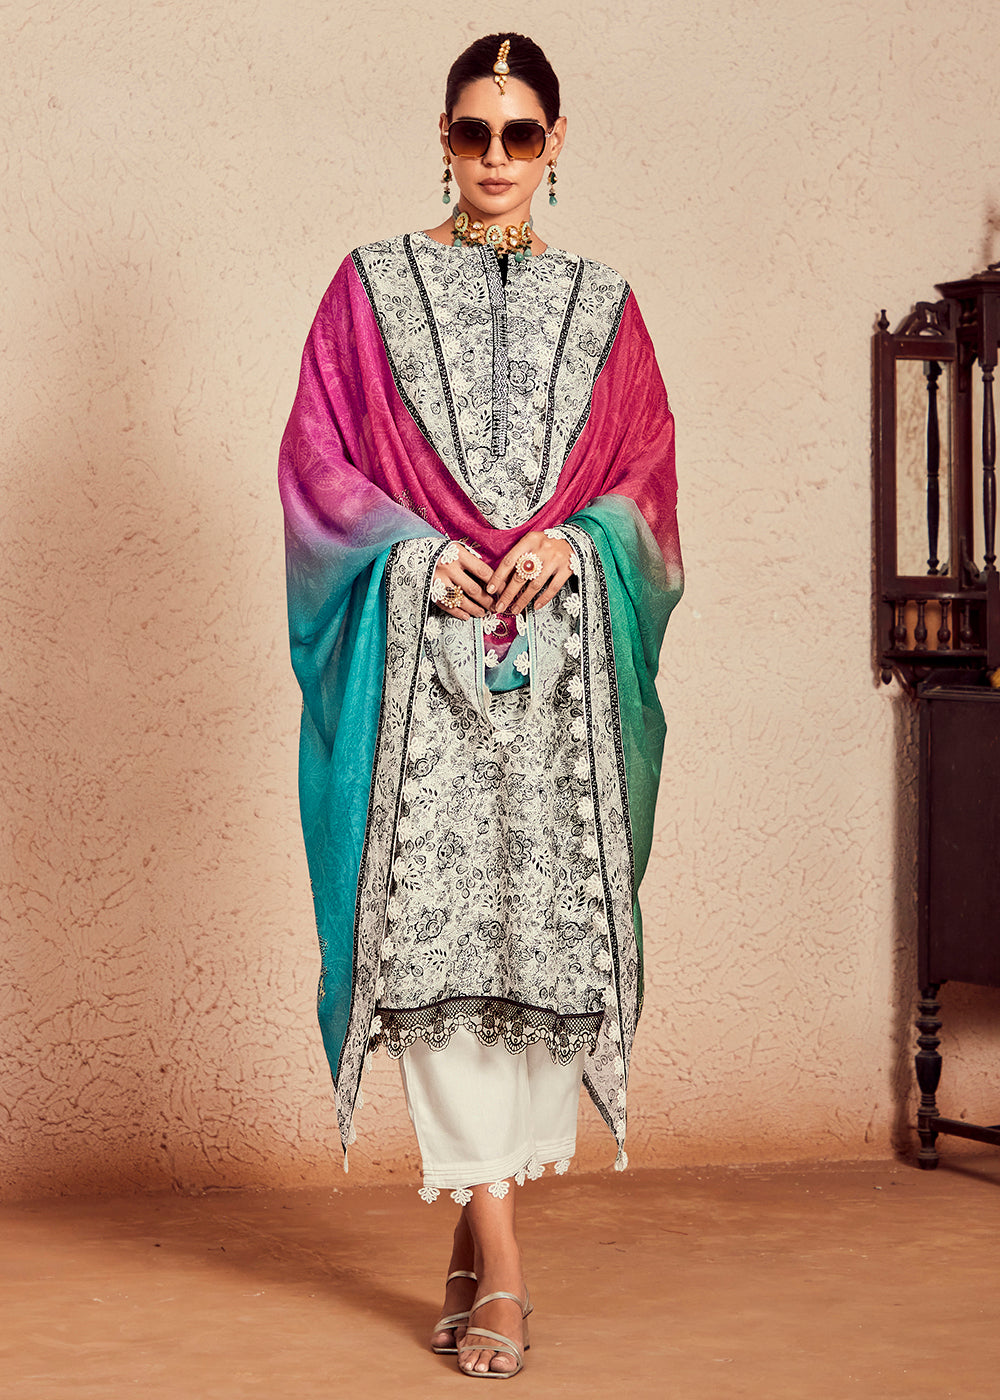 Buy Now Off White Muslin Cotton Digital Print & Embroidered Salwar Suit Online in USA, UK, Canada, Germany, Australia & Worldwide at Empress Clothing. 